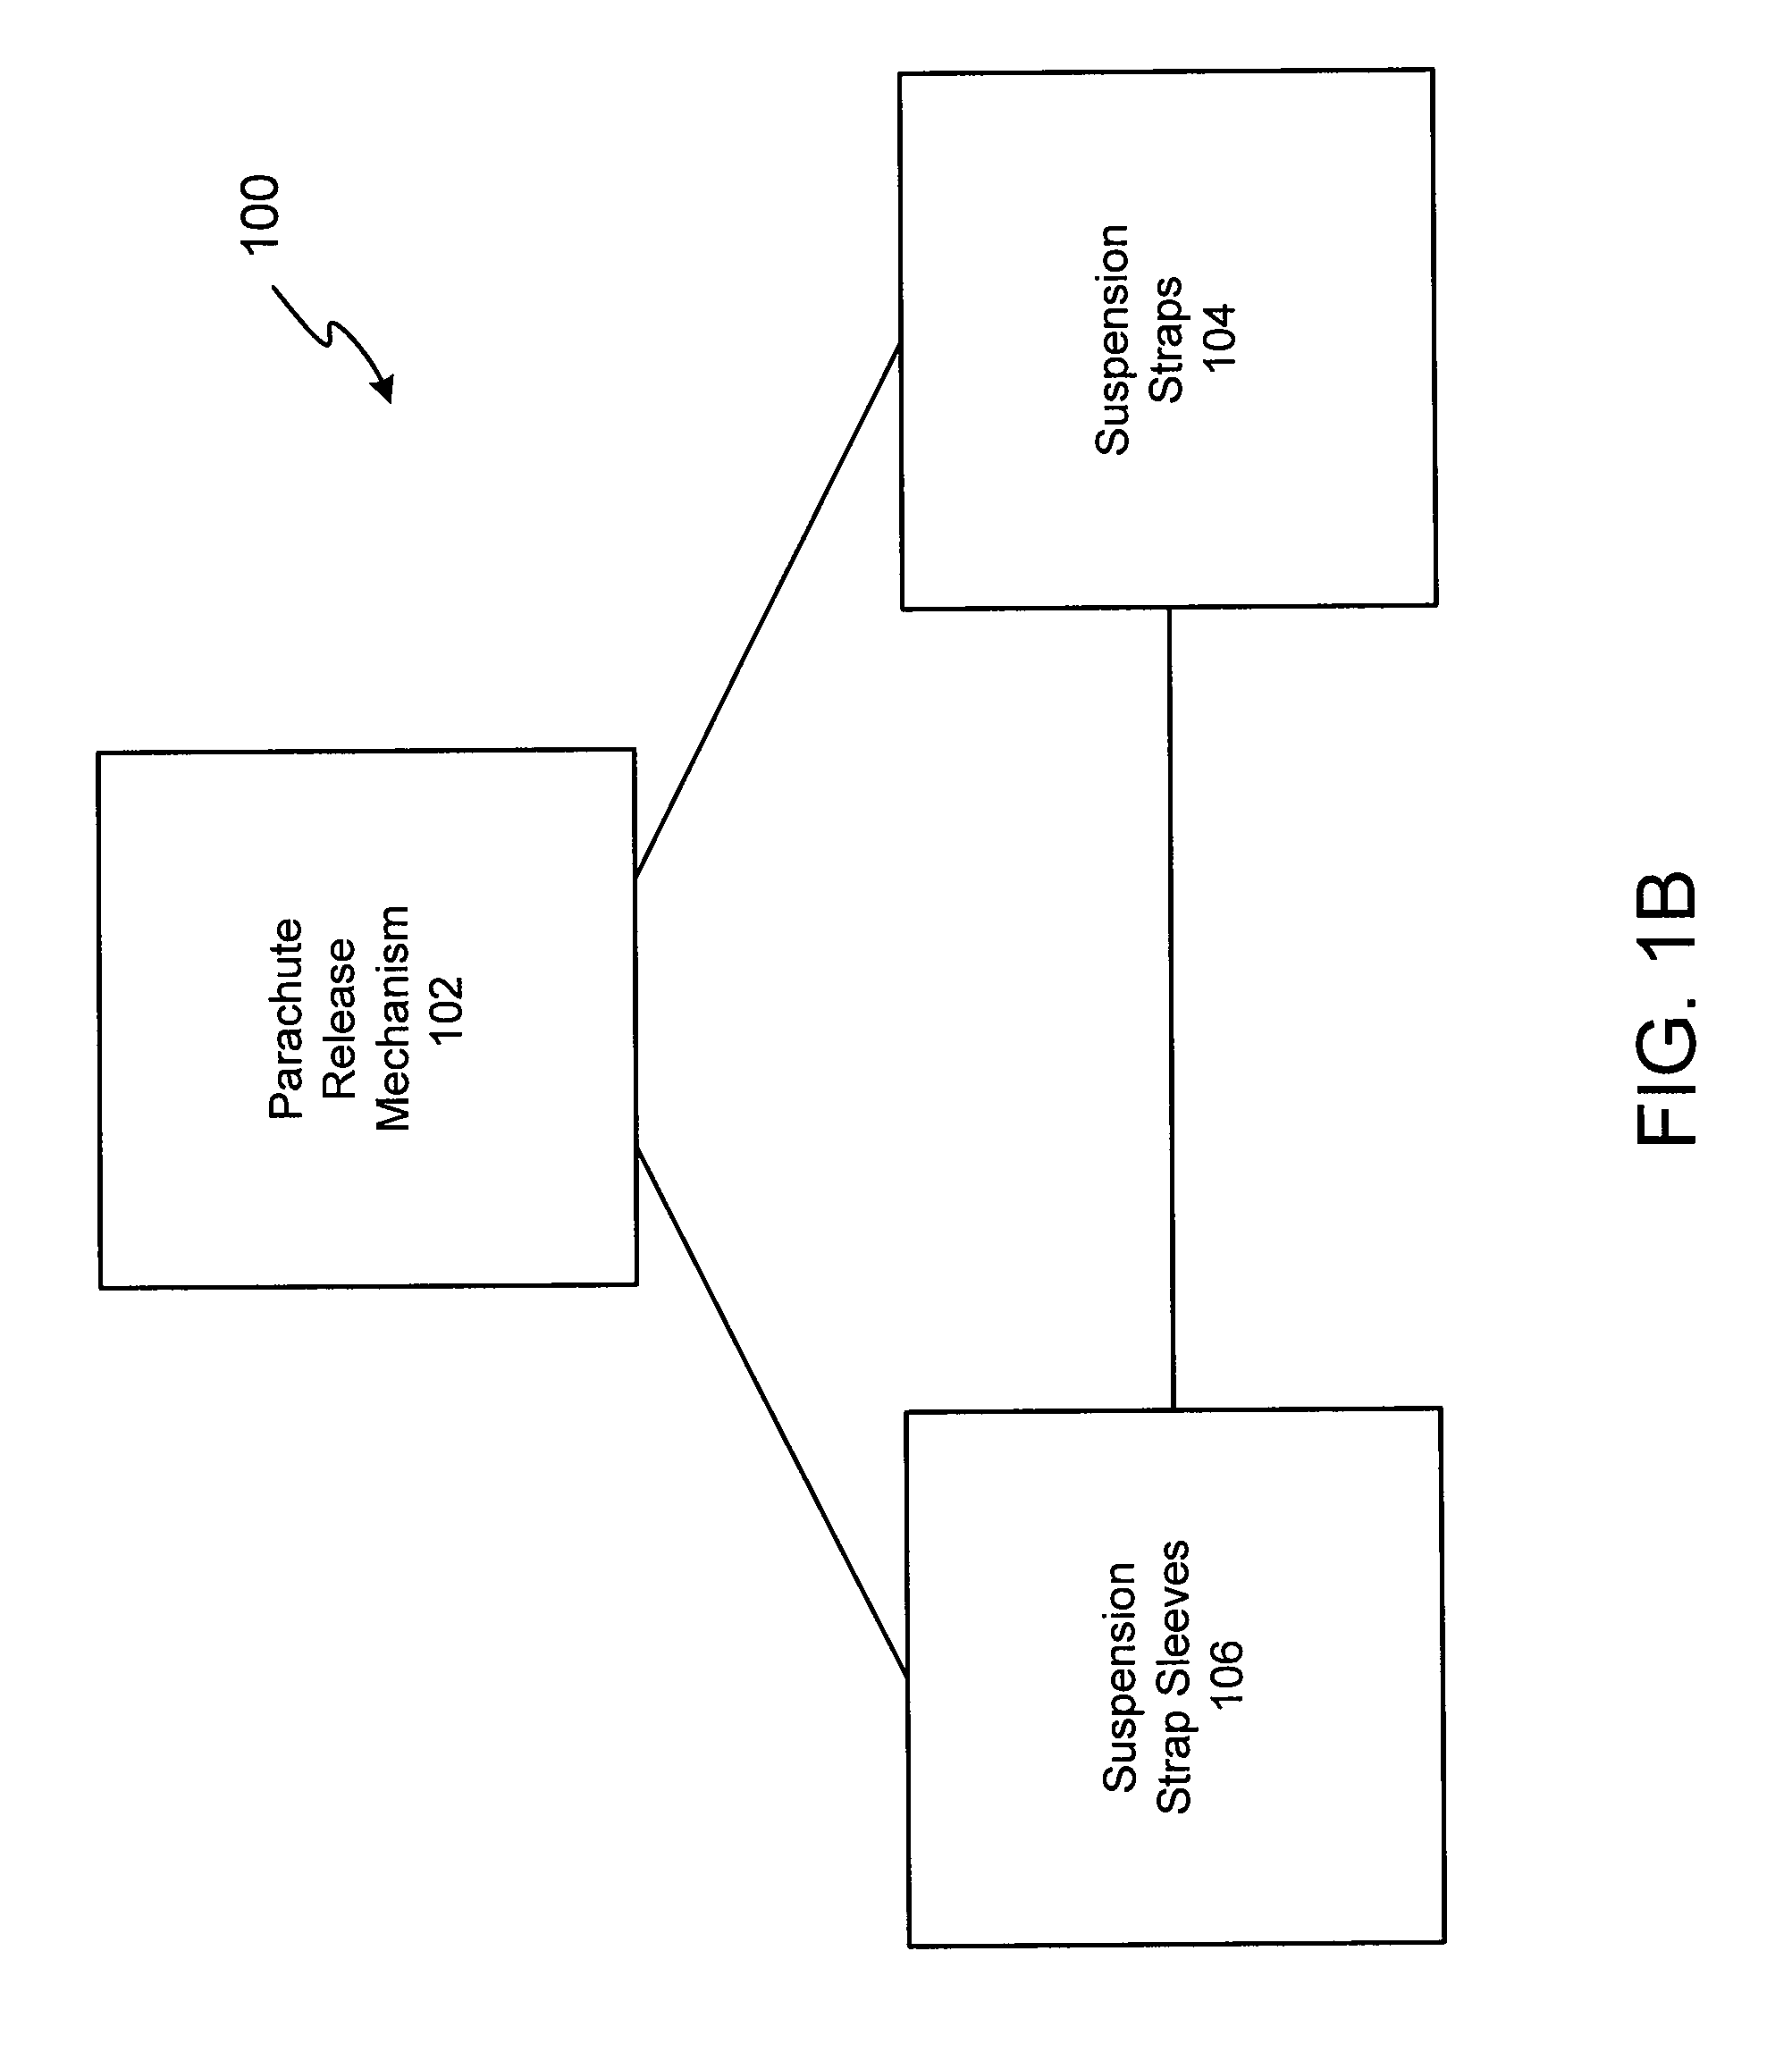 Parachute release system and method